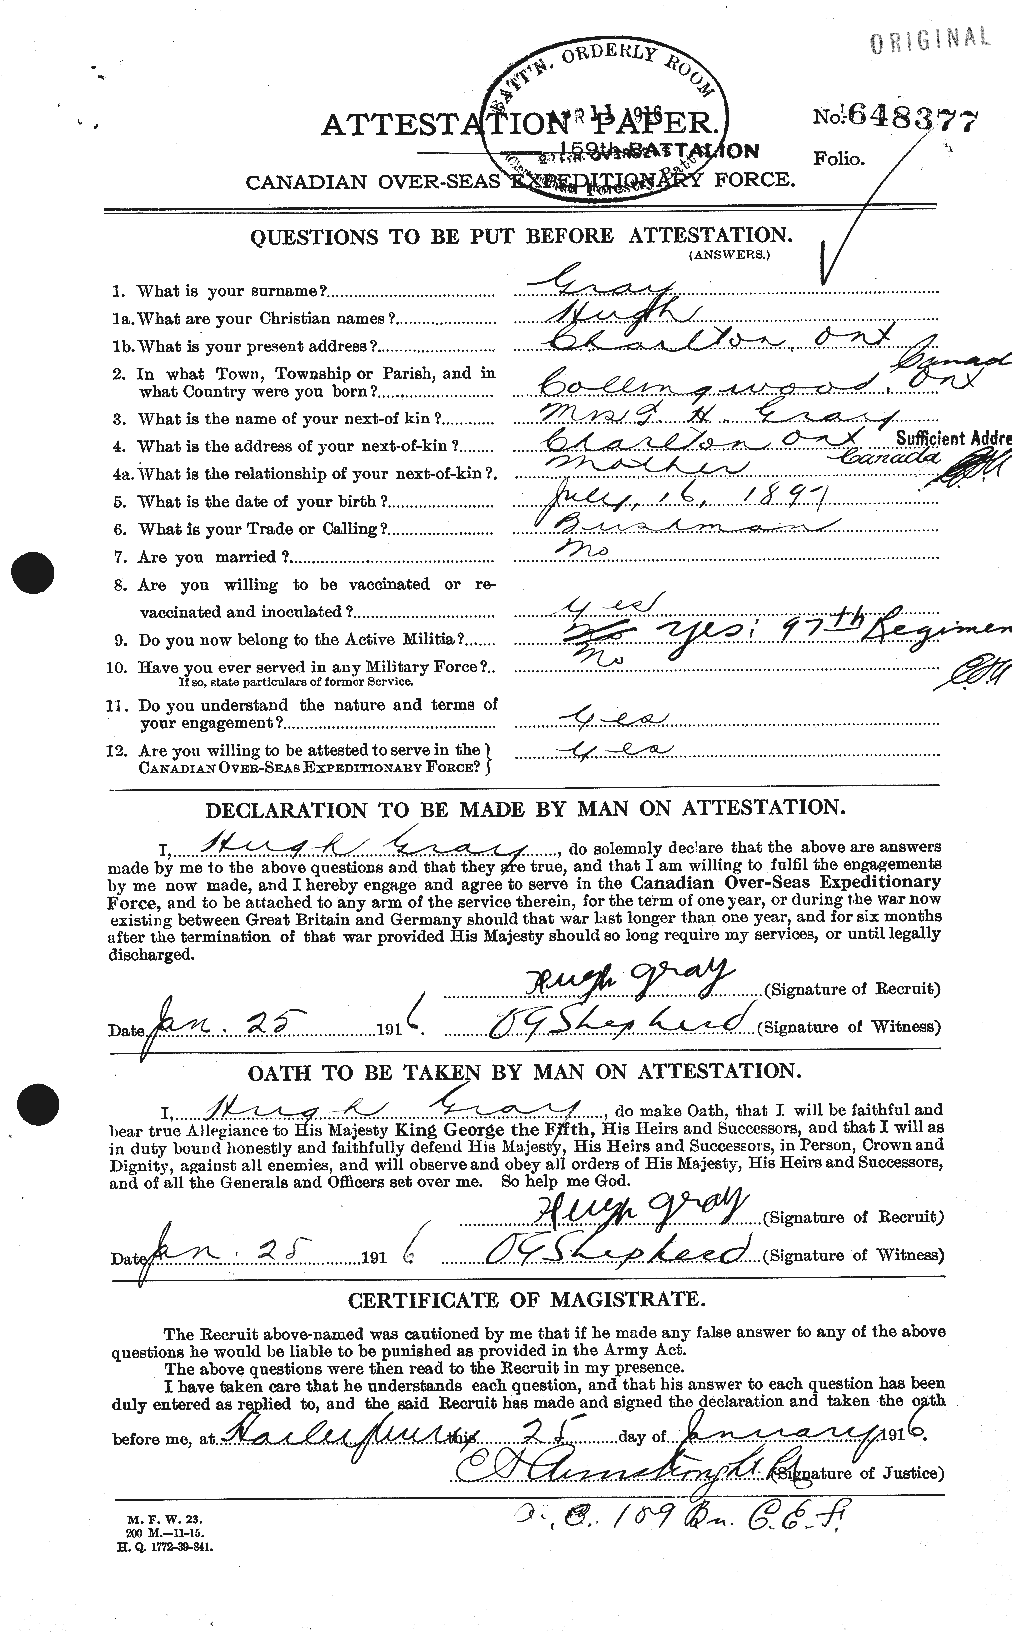 Personnel Records of the First World War - CEF 363254a